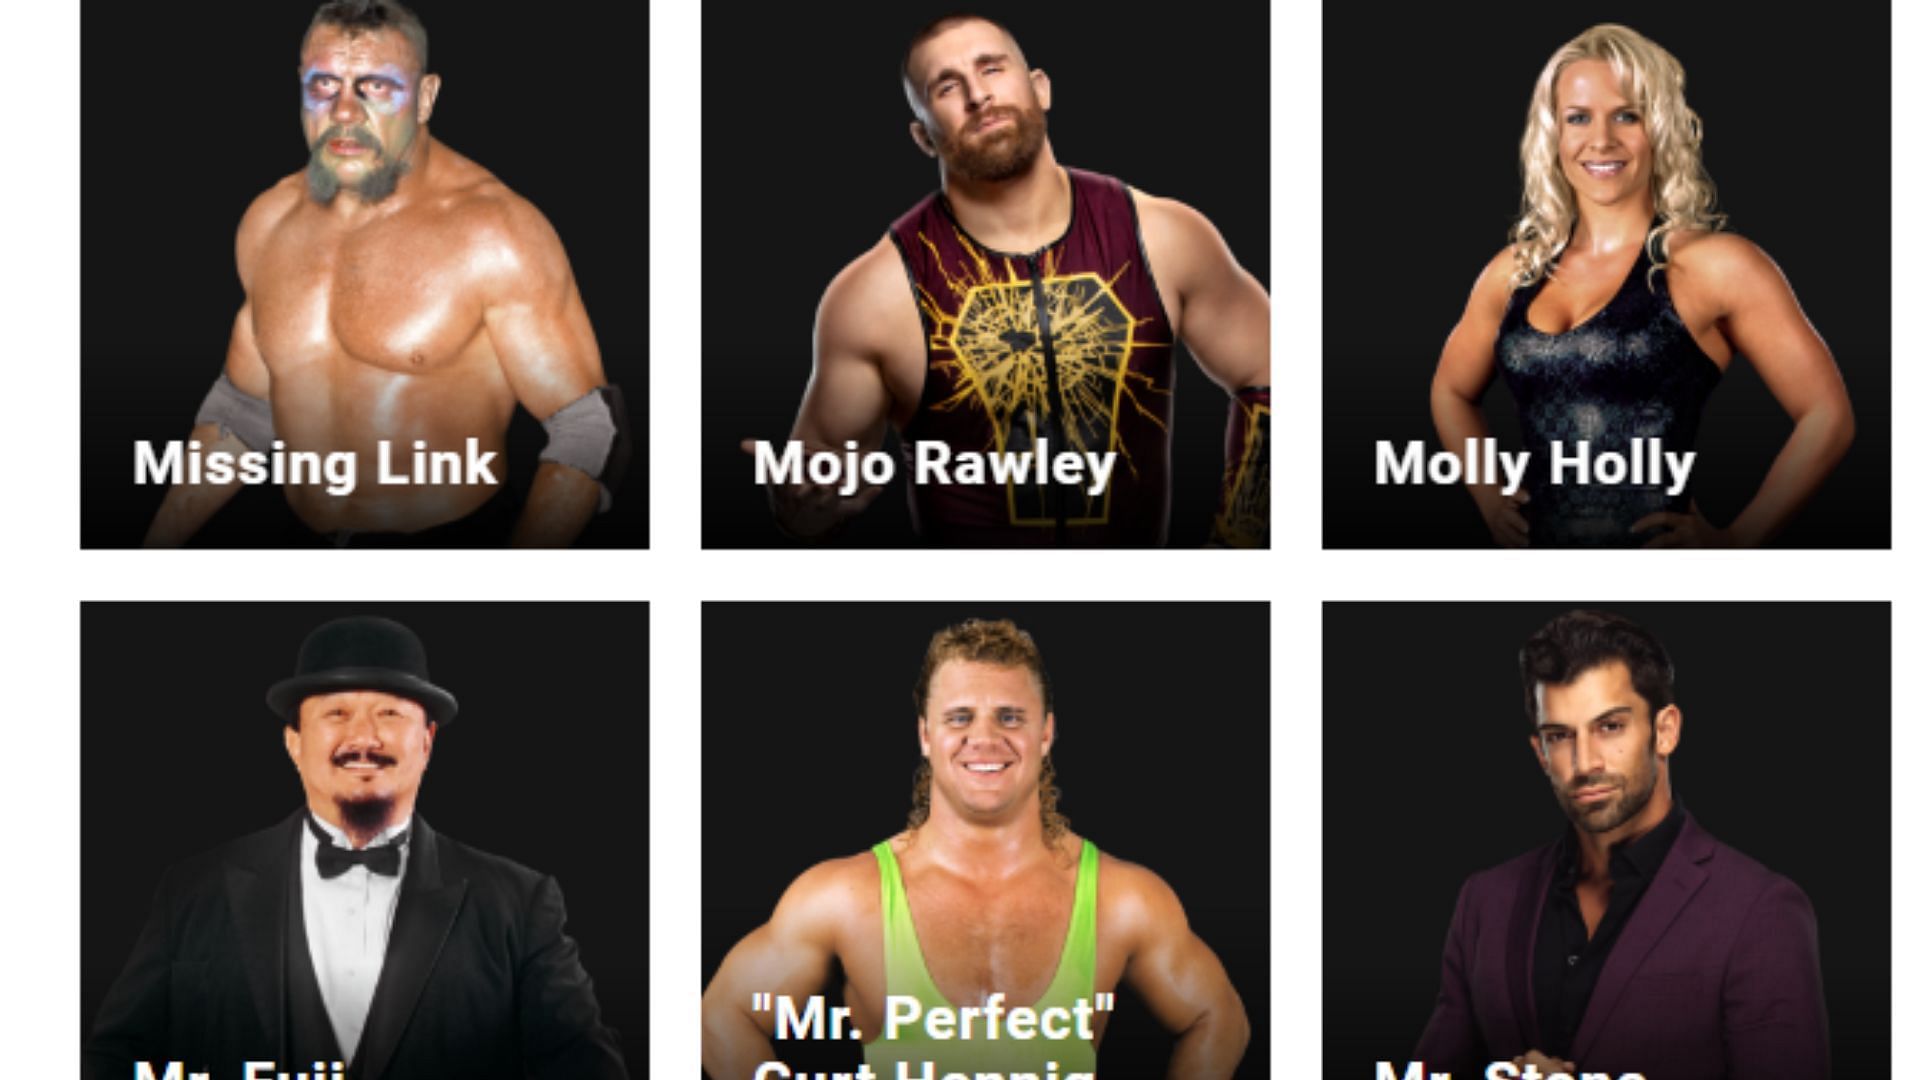 The WWE Superstar page no longer has his name.